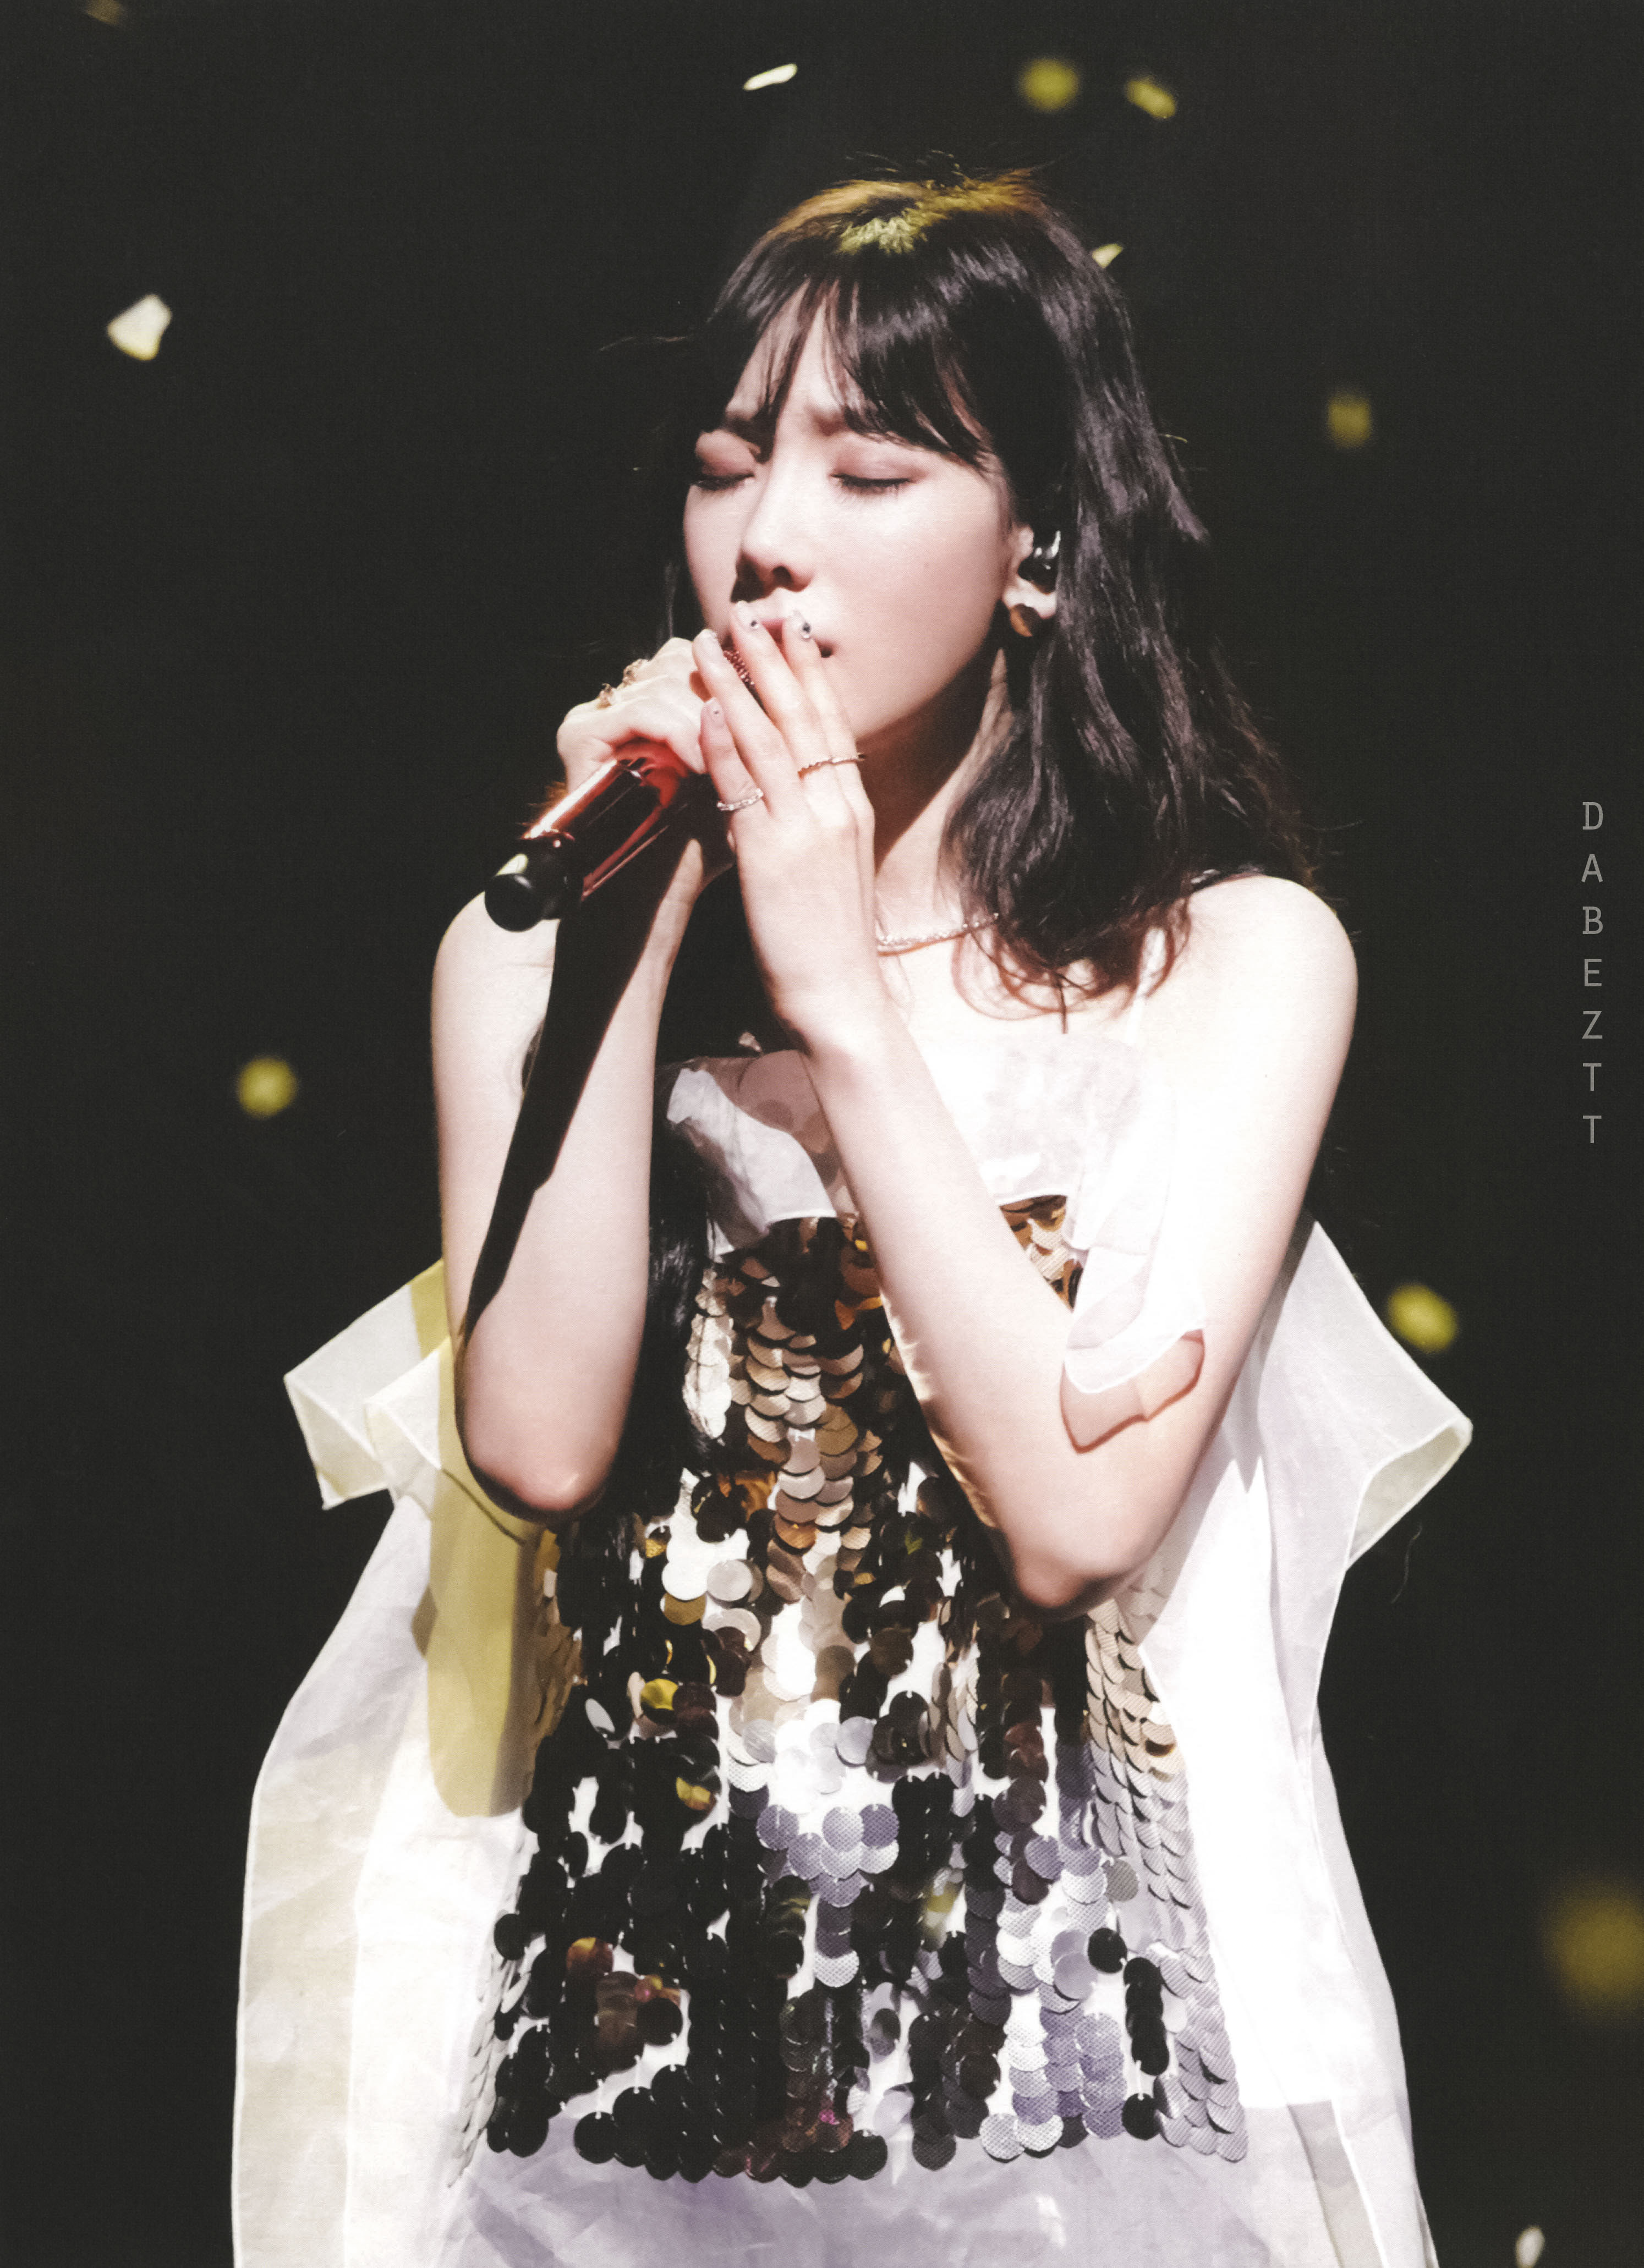 180323 TAEYEON SPECIAL LIVE “The Magic of Christmas Time” DVD 스캔 by Dabeztt (16).jpg